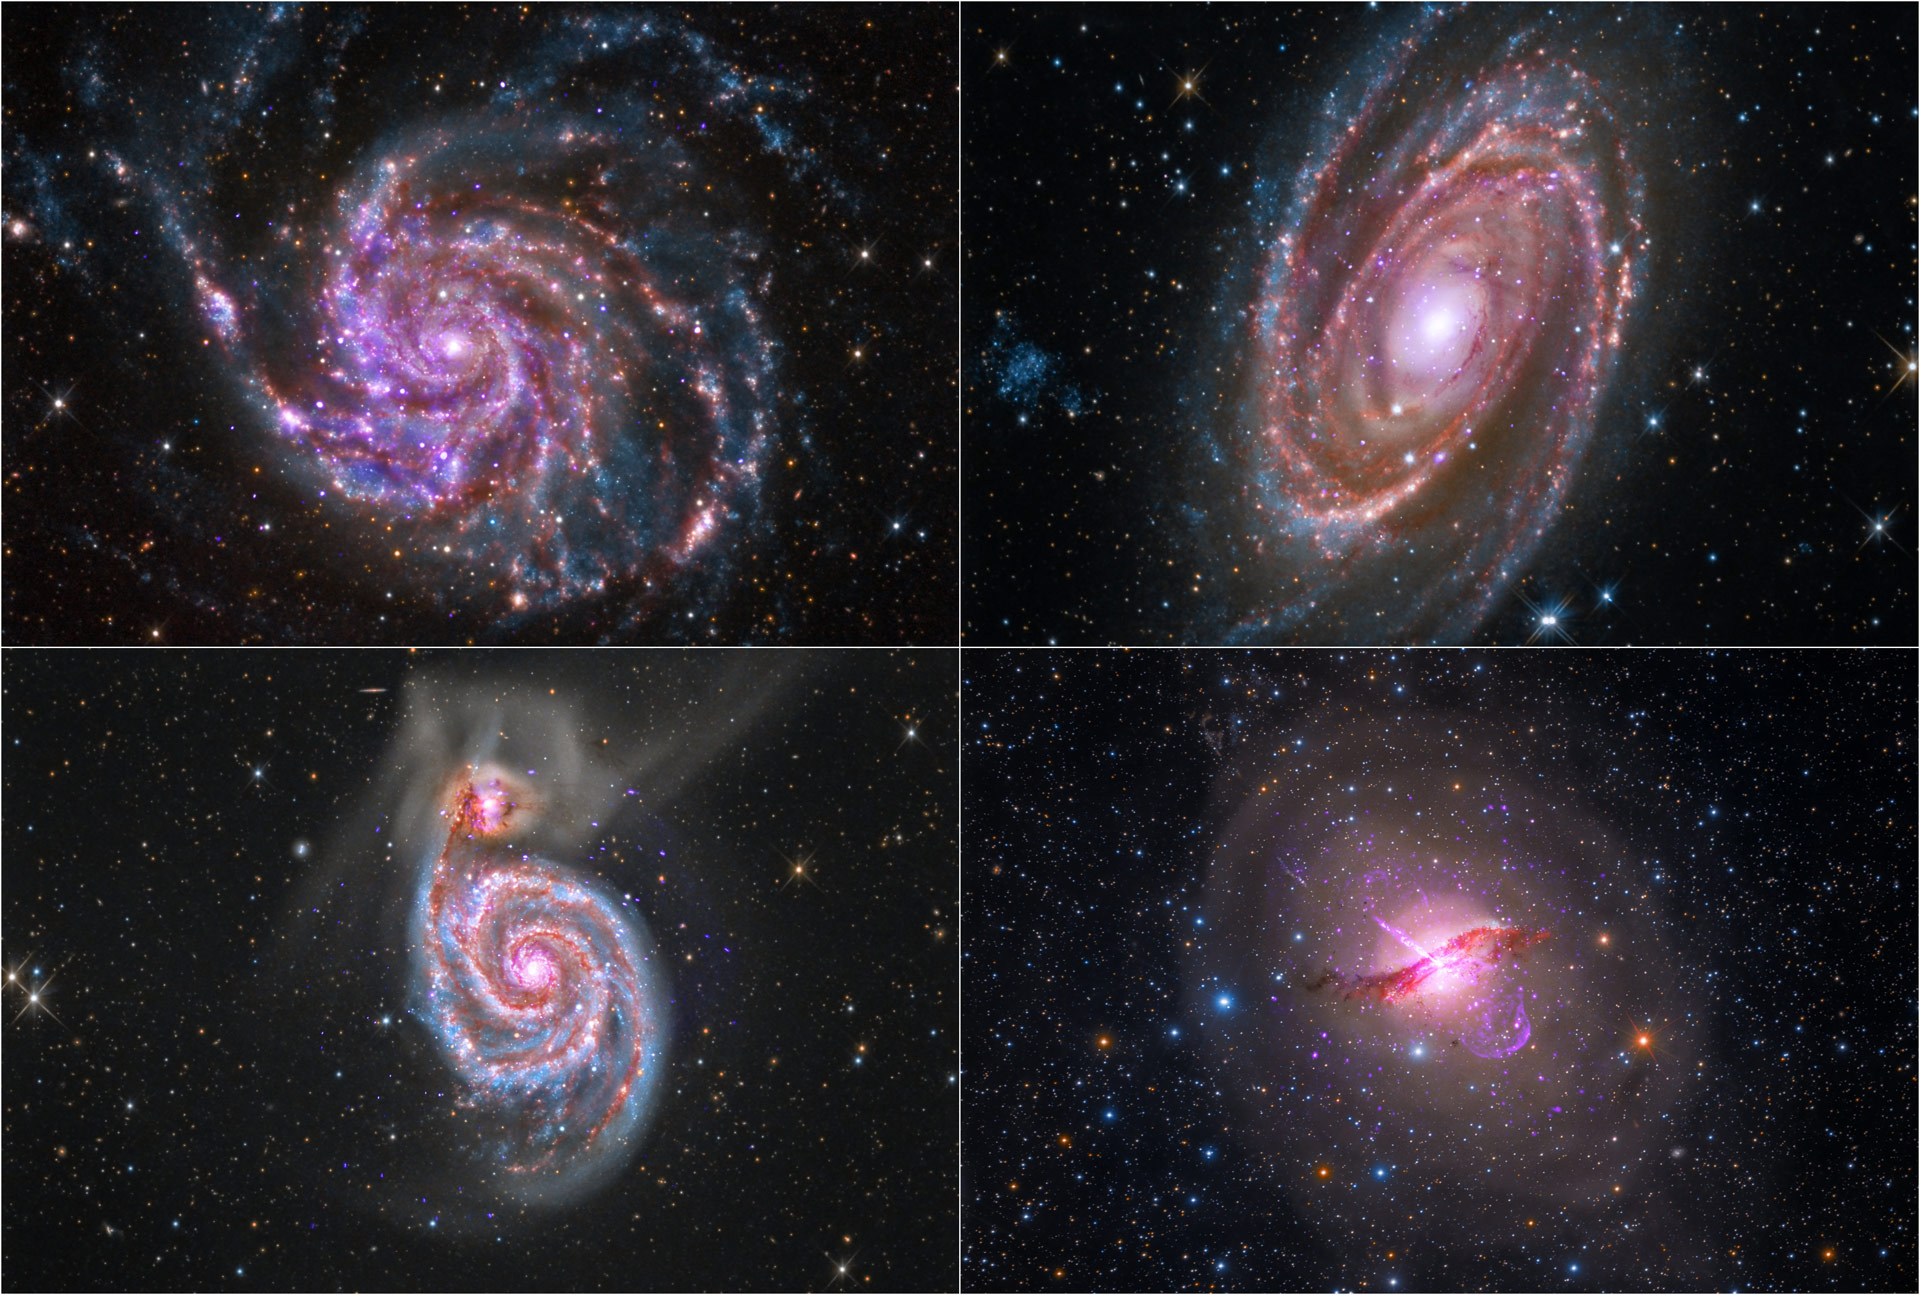 Amateur Astronomers Combine Data to Reveal New Images of Galaxies